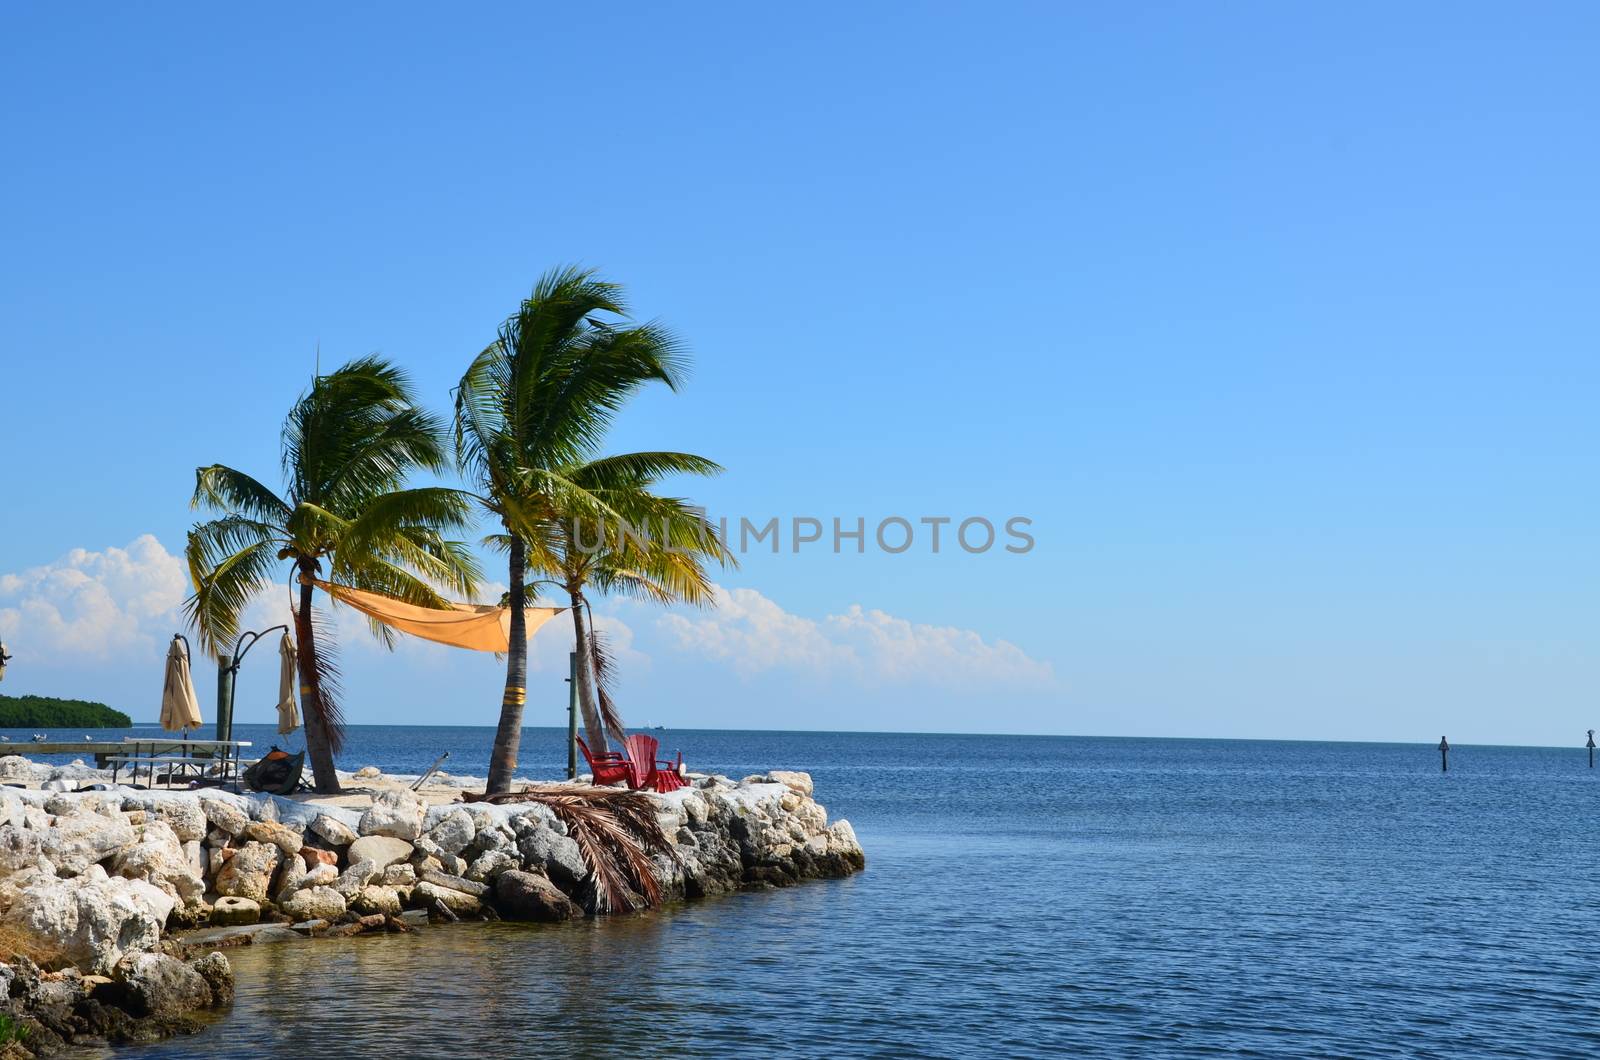 a spot on the edge of the island makes a quiet place to sit and enjoy the ocean in the florida keys. Two charis and a few palm trees complete the scene.